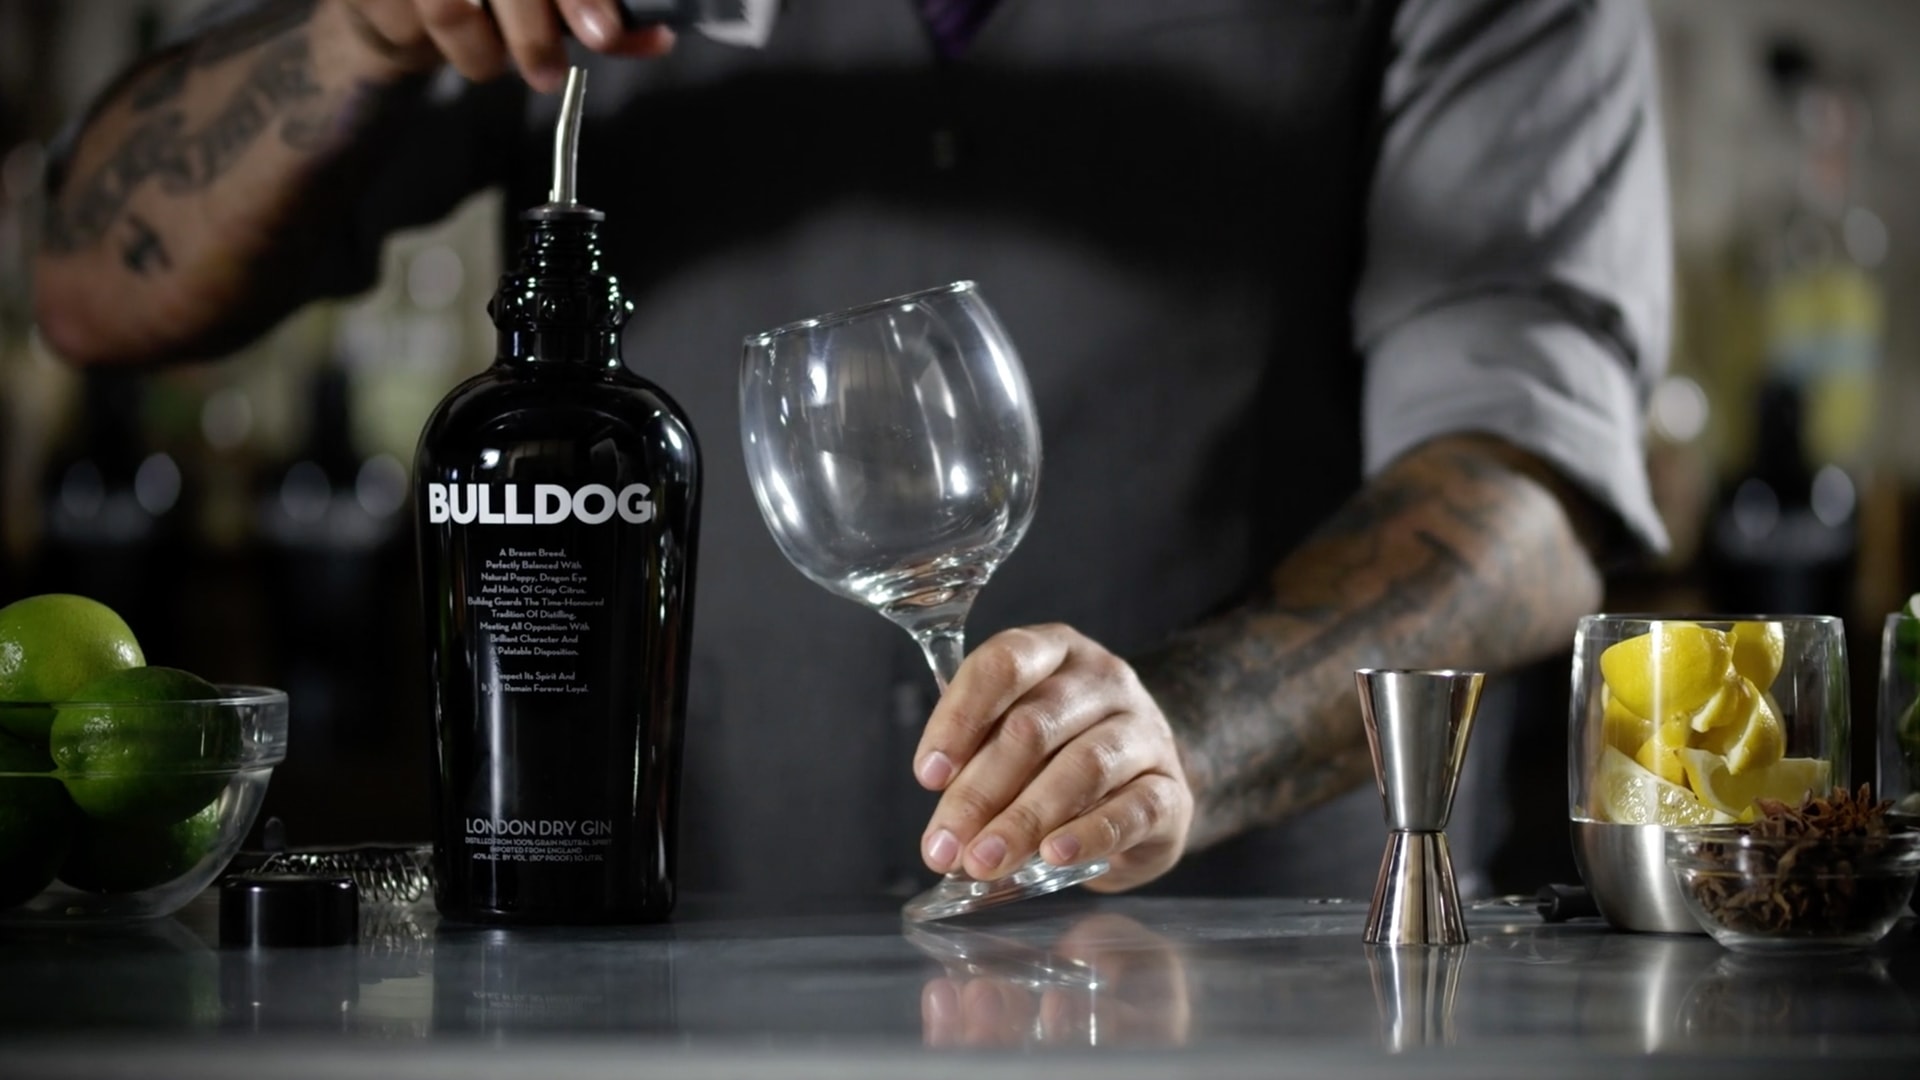 A bartender about to make a drink with bulldog gin.